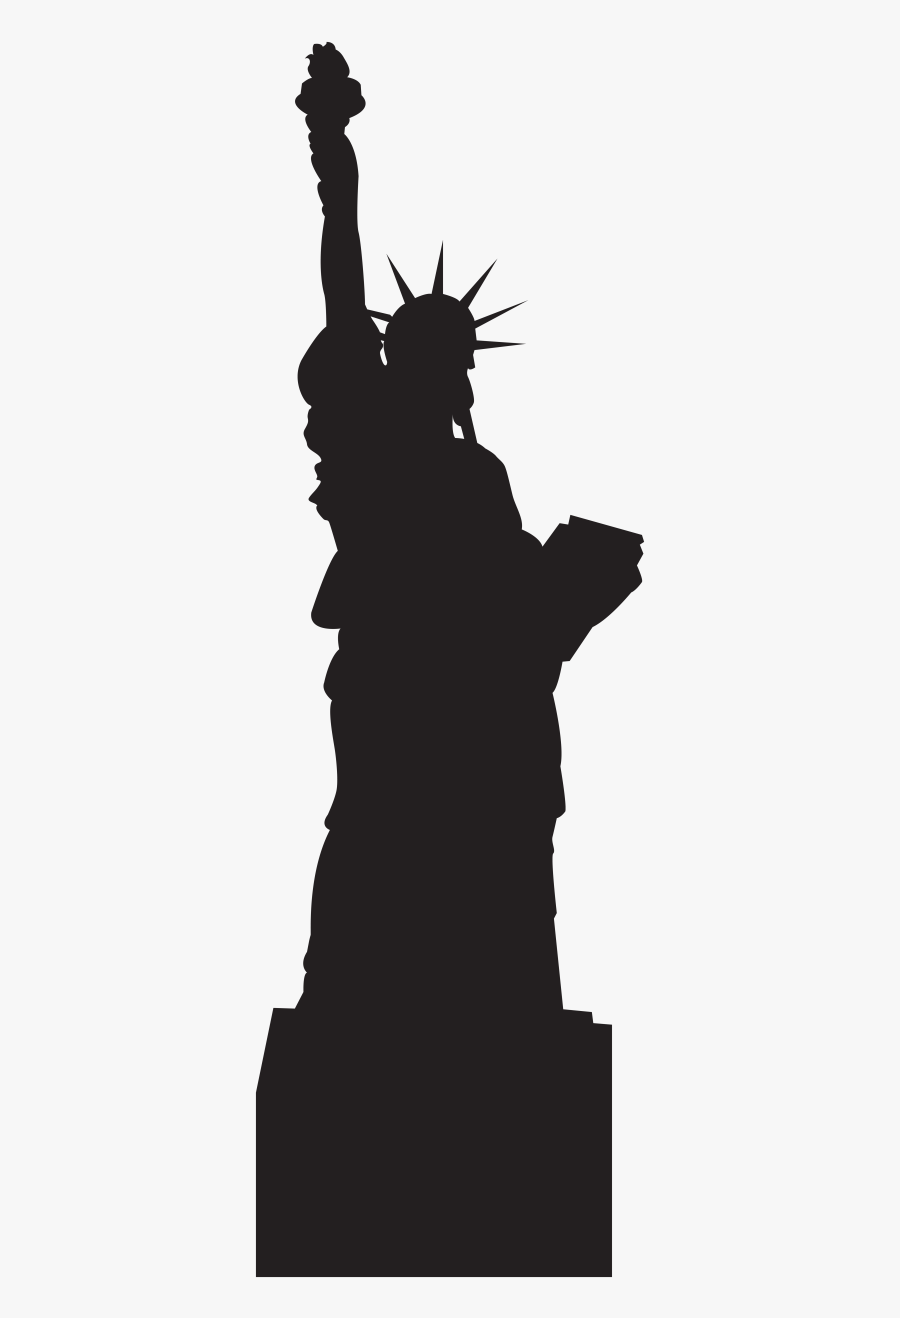 Statue Of Liberty Silhouette Png, Transparent Clipart